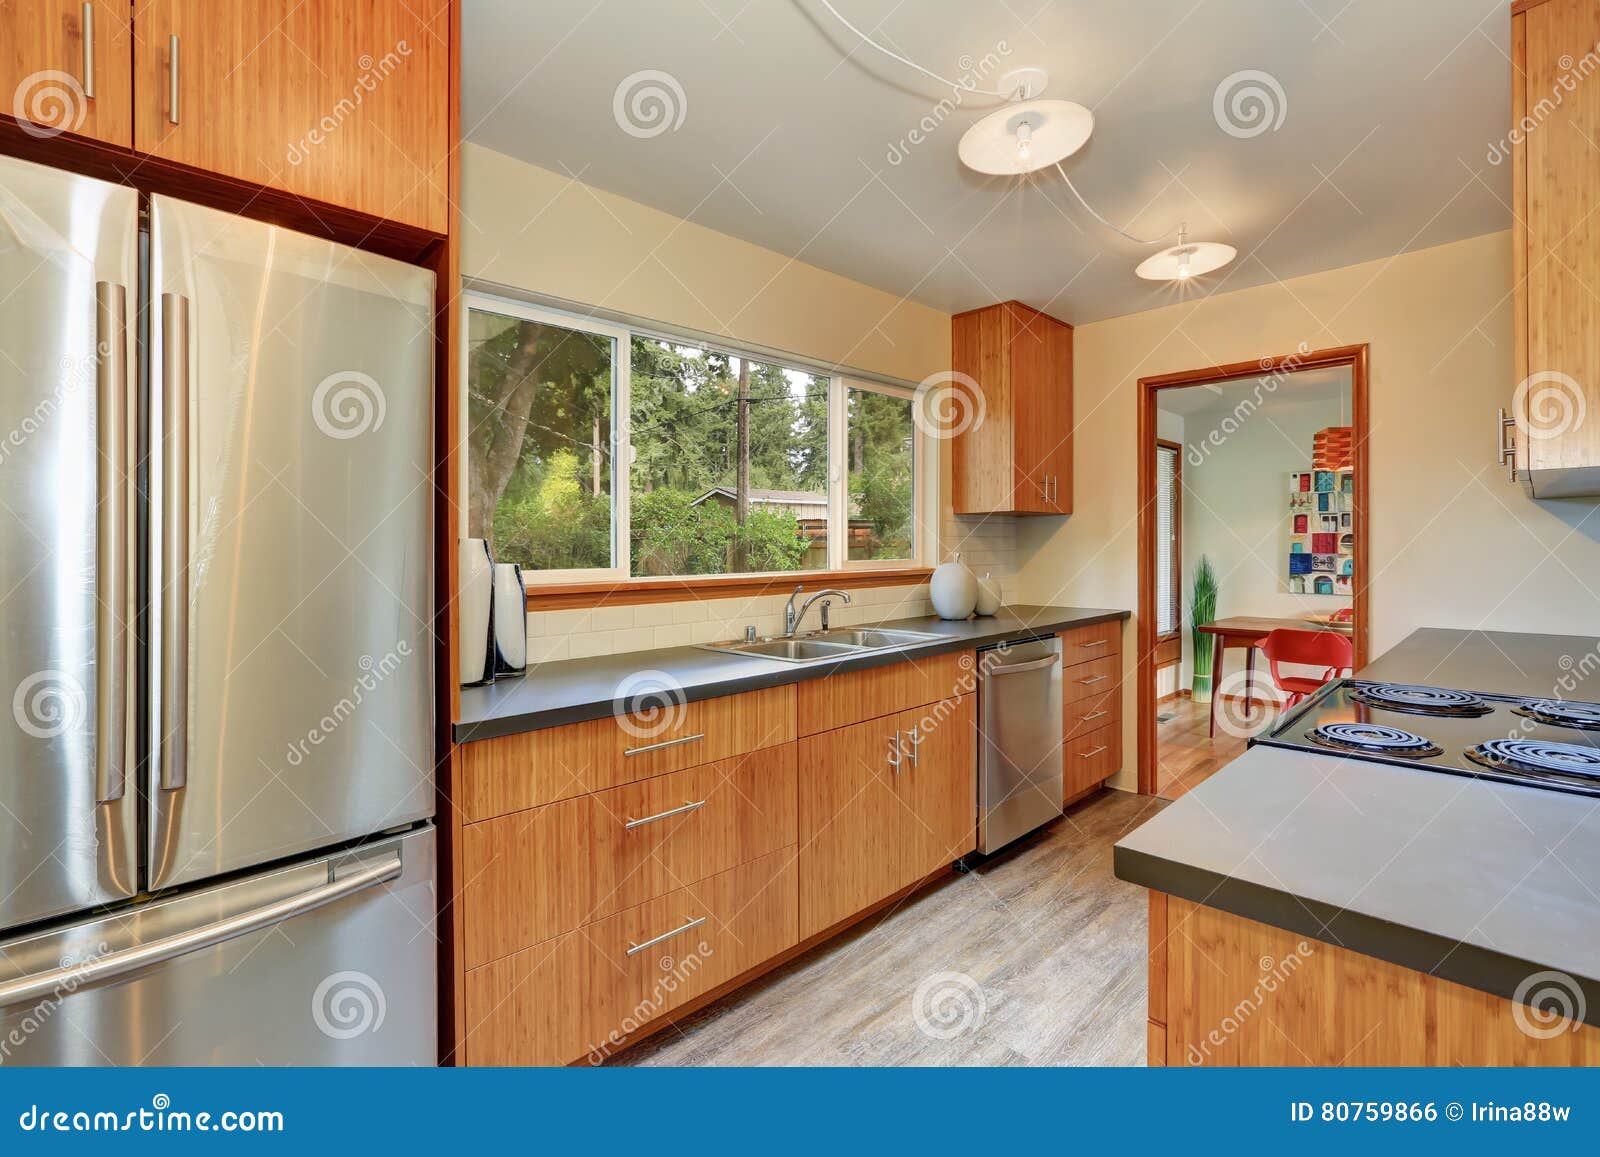 Narrow Kitchen Room With Long Grey Counters Stock Photo Image Of